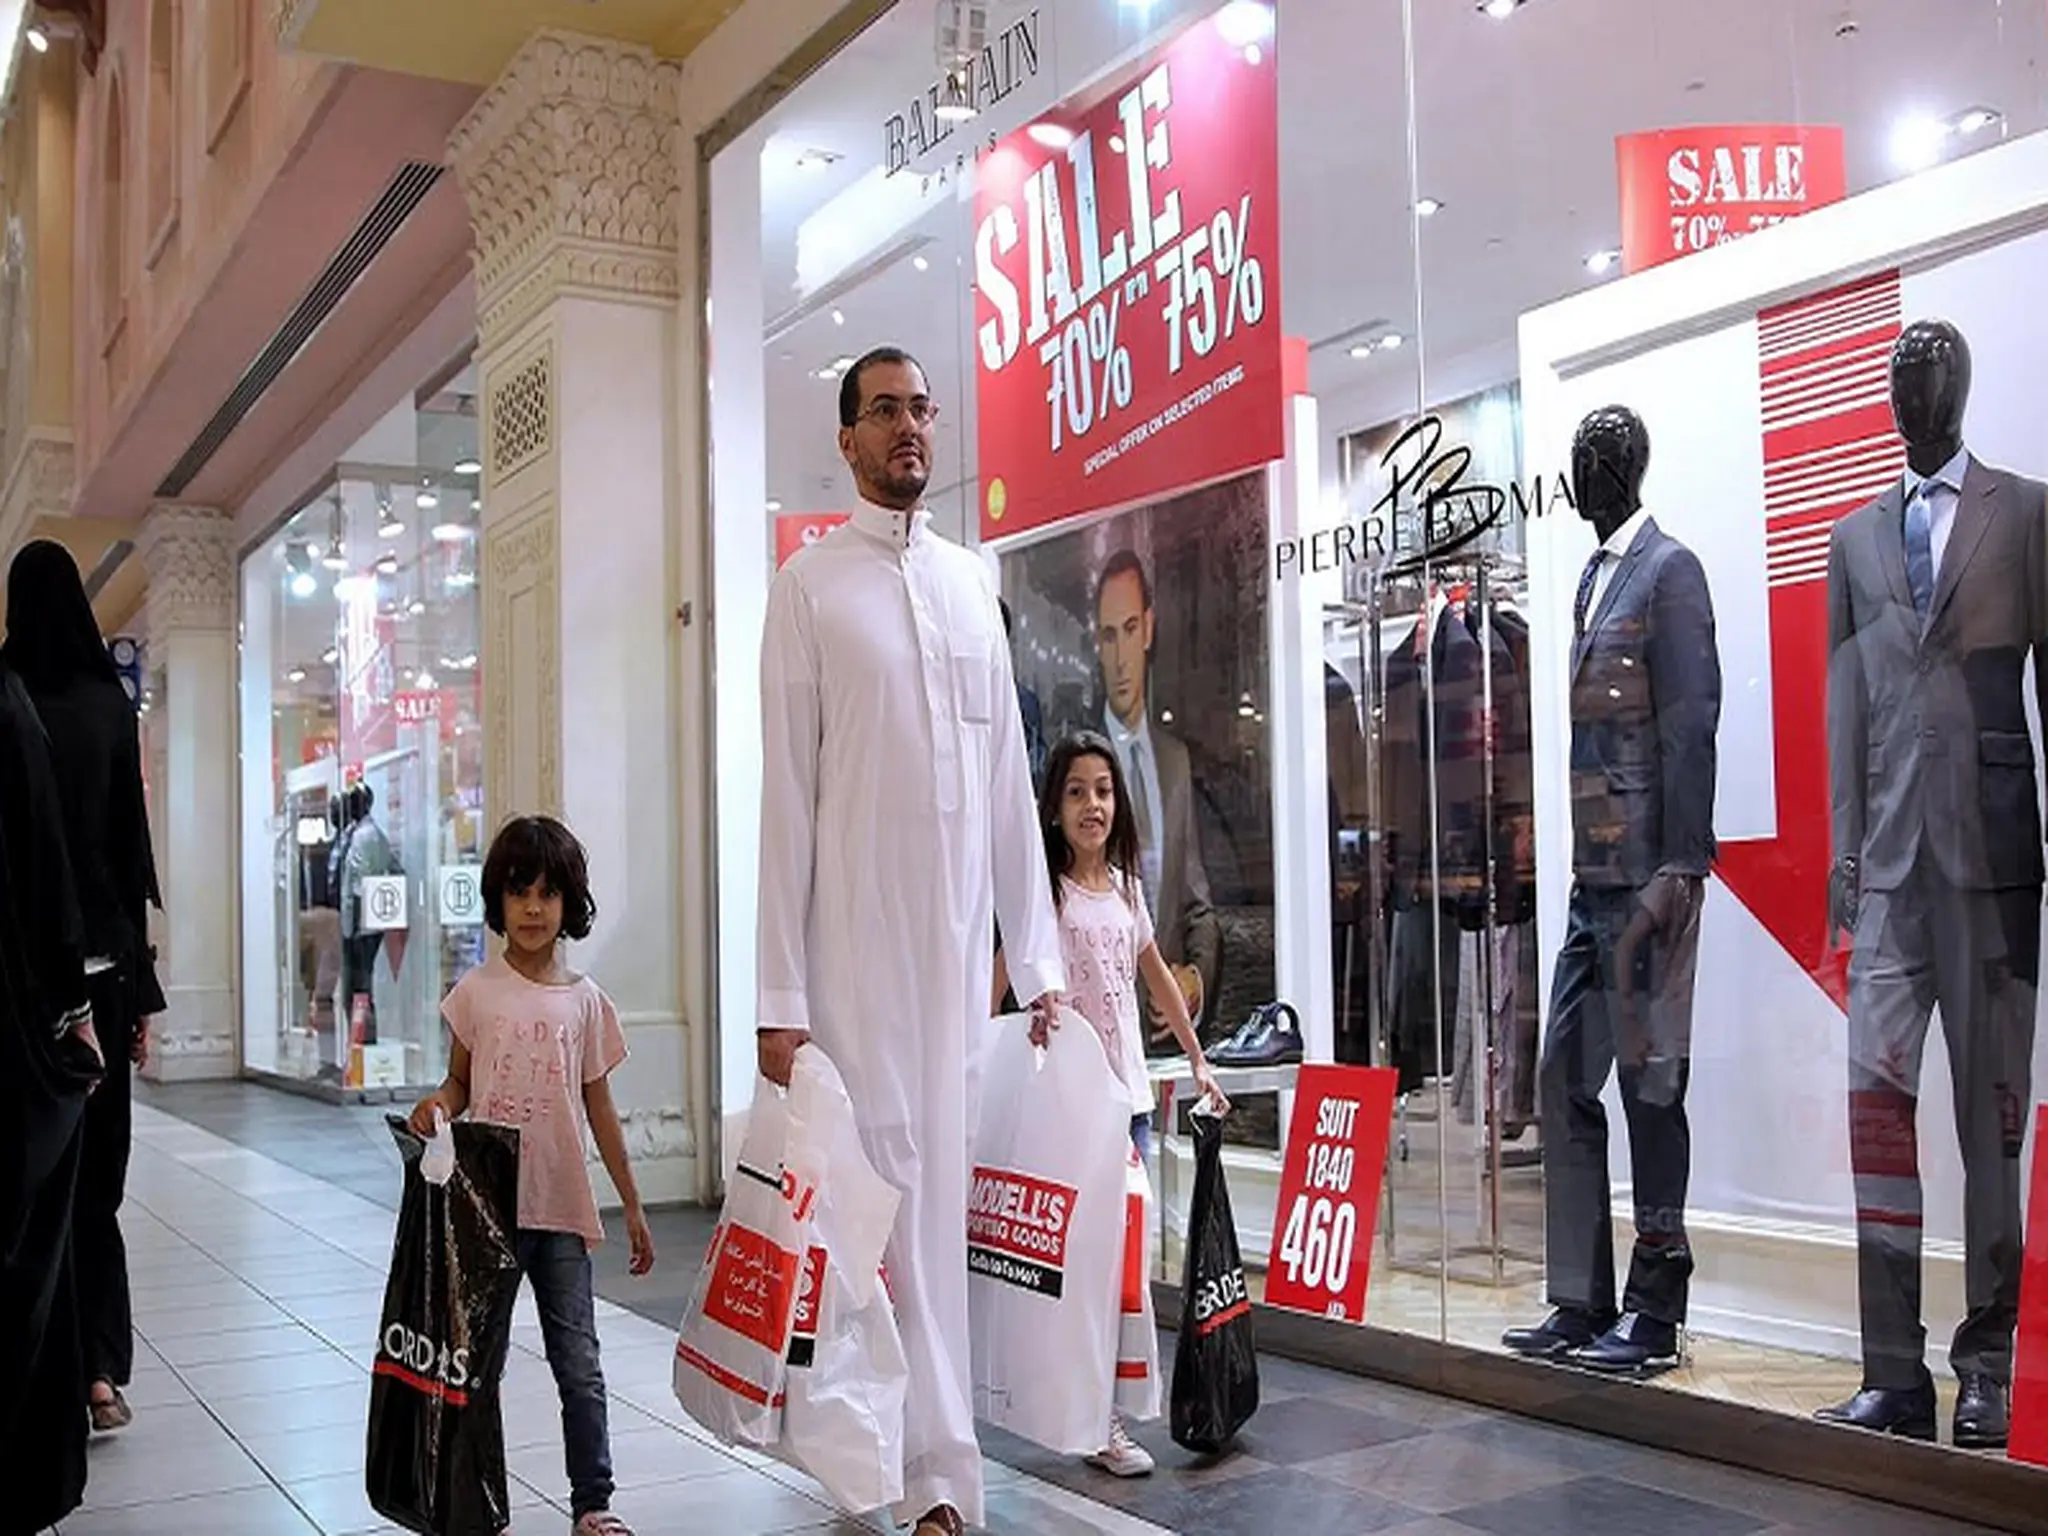 The start date for the big sale days in Dubai and the participating shopping malls